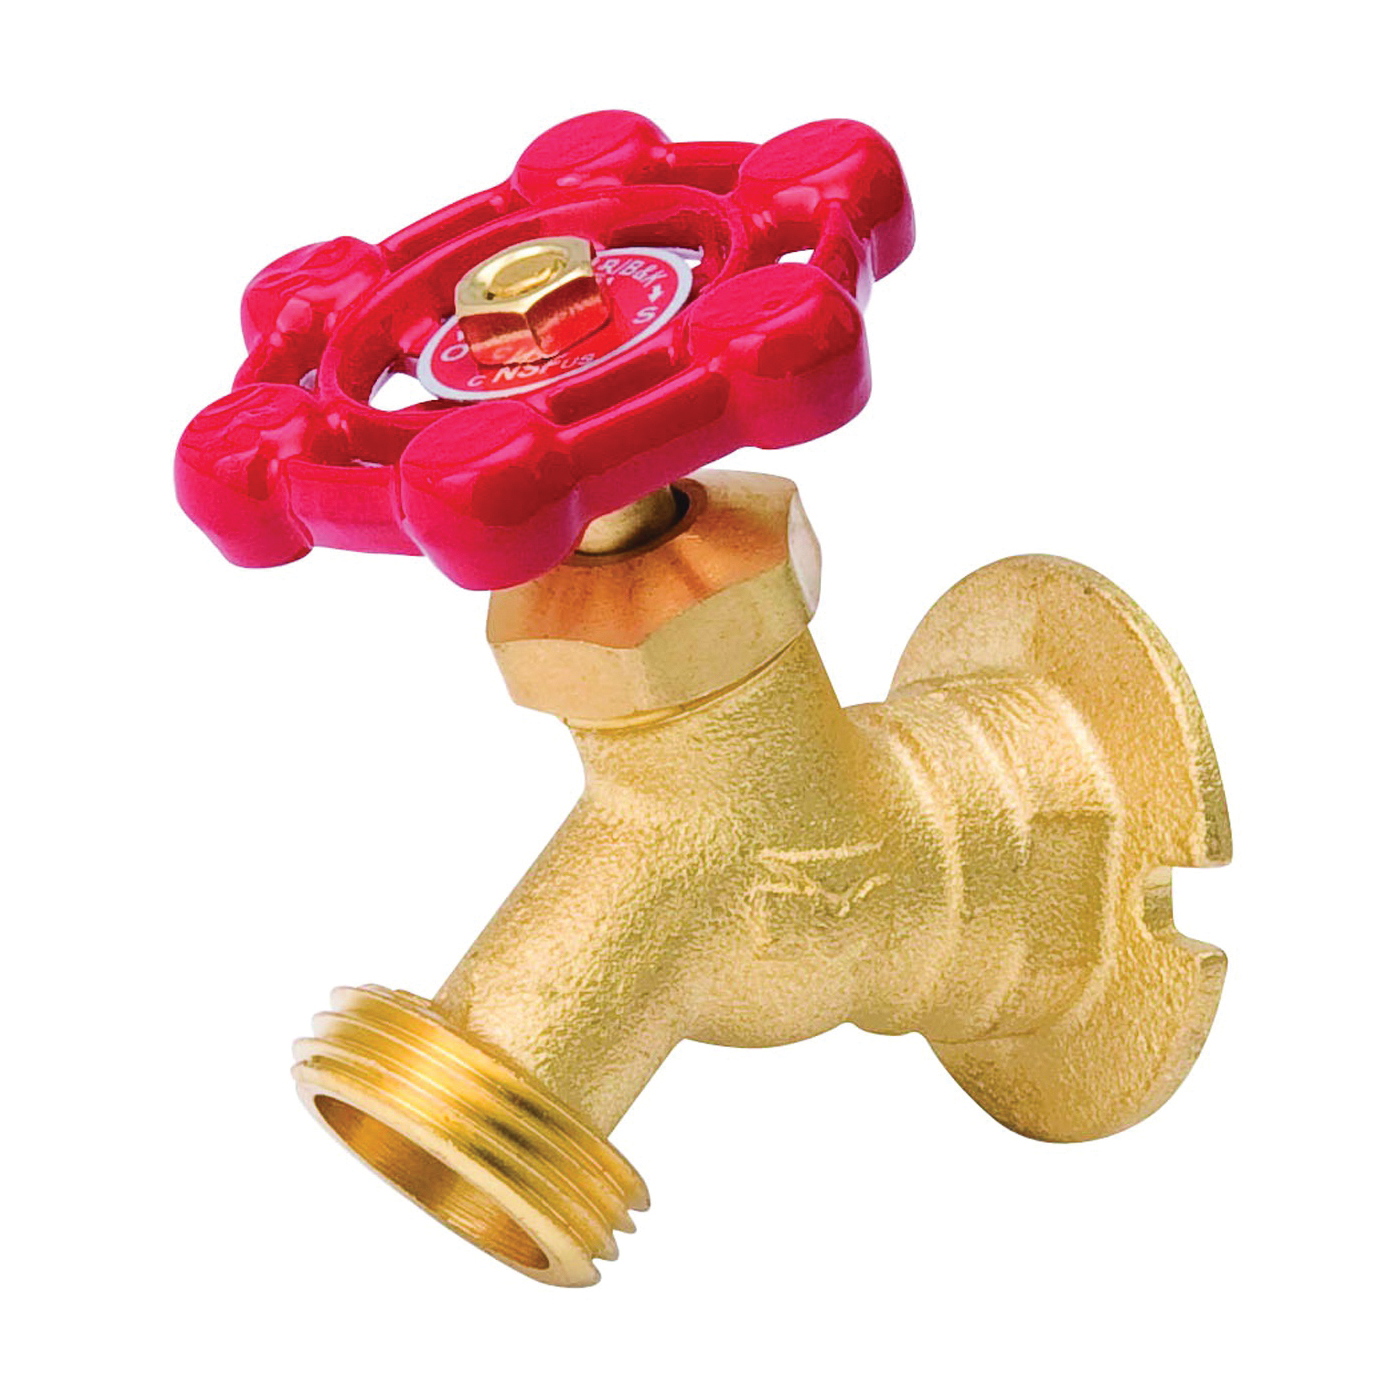 108-004HN Sillcock Valve, 3/4 x 3/4 in Connection, FPT x Male Hose, 125 psi Pressure, Brass Body